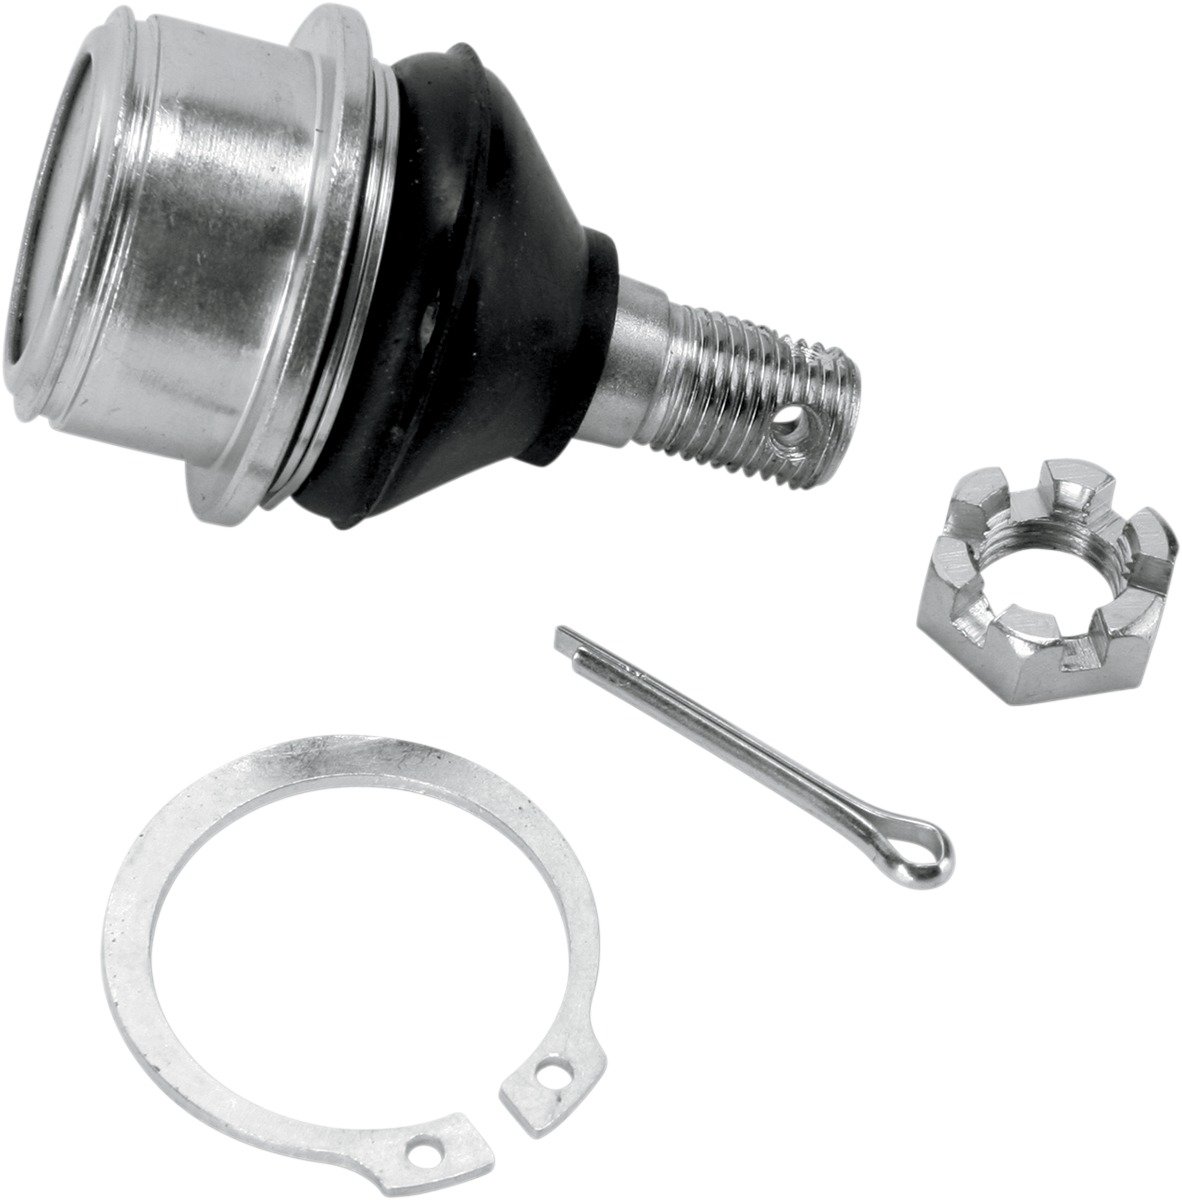 Front Ball Joint - Fits Many 99-12 Can Am ATVs/UTVs - Click Image to Close